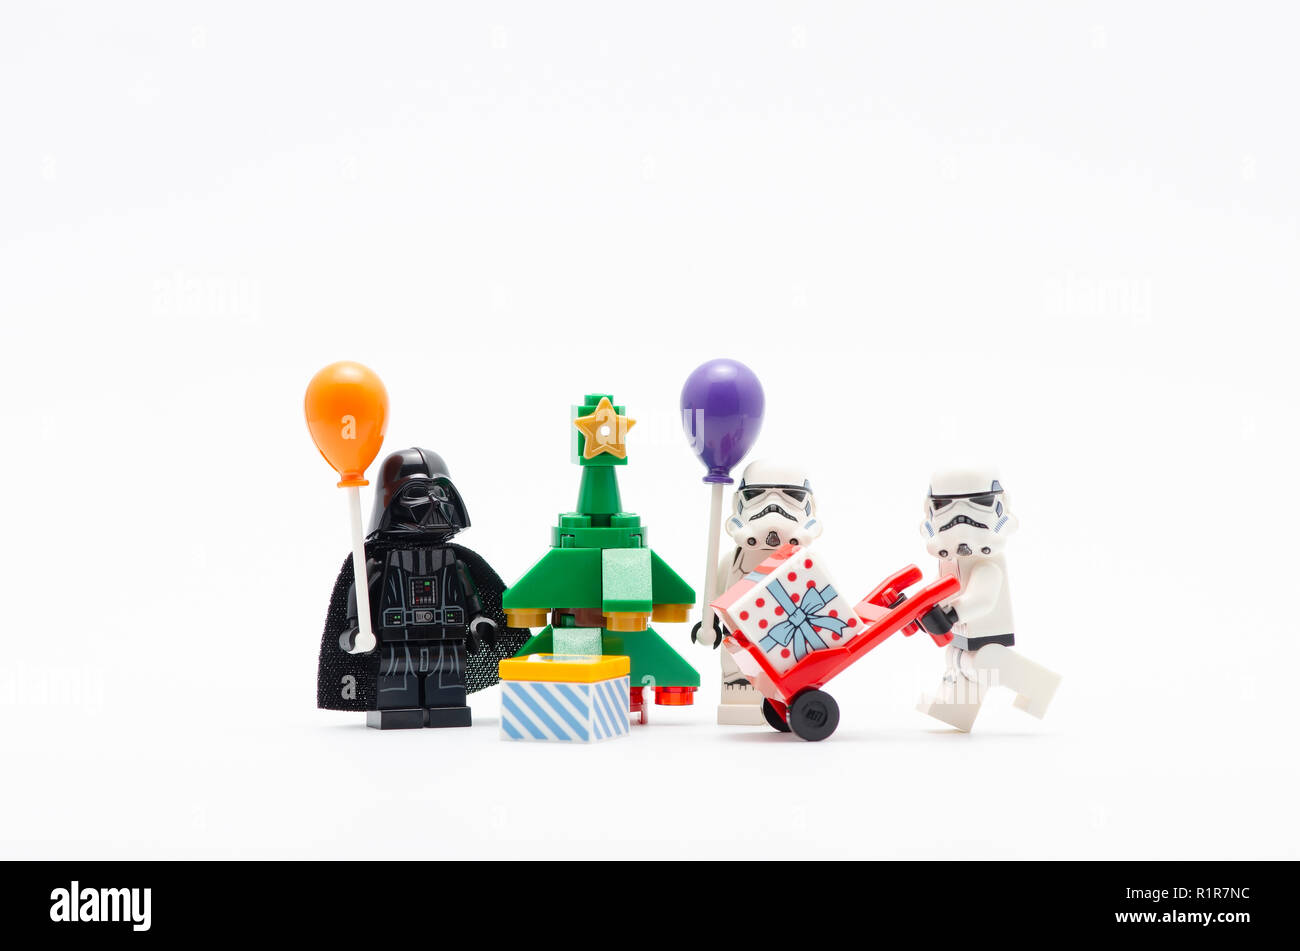 lego darth vader and storm troopers celebrating christmas. Lego minifigures are manufactured by The Lego Group. Stock Photo